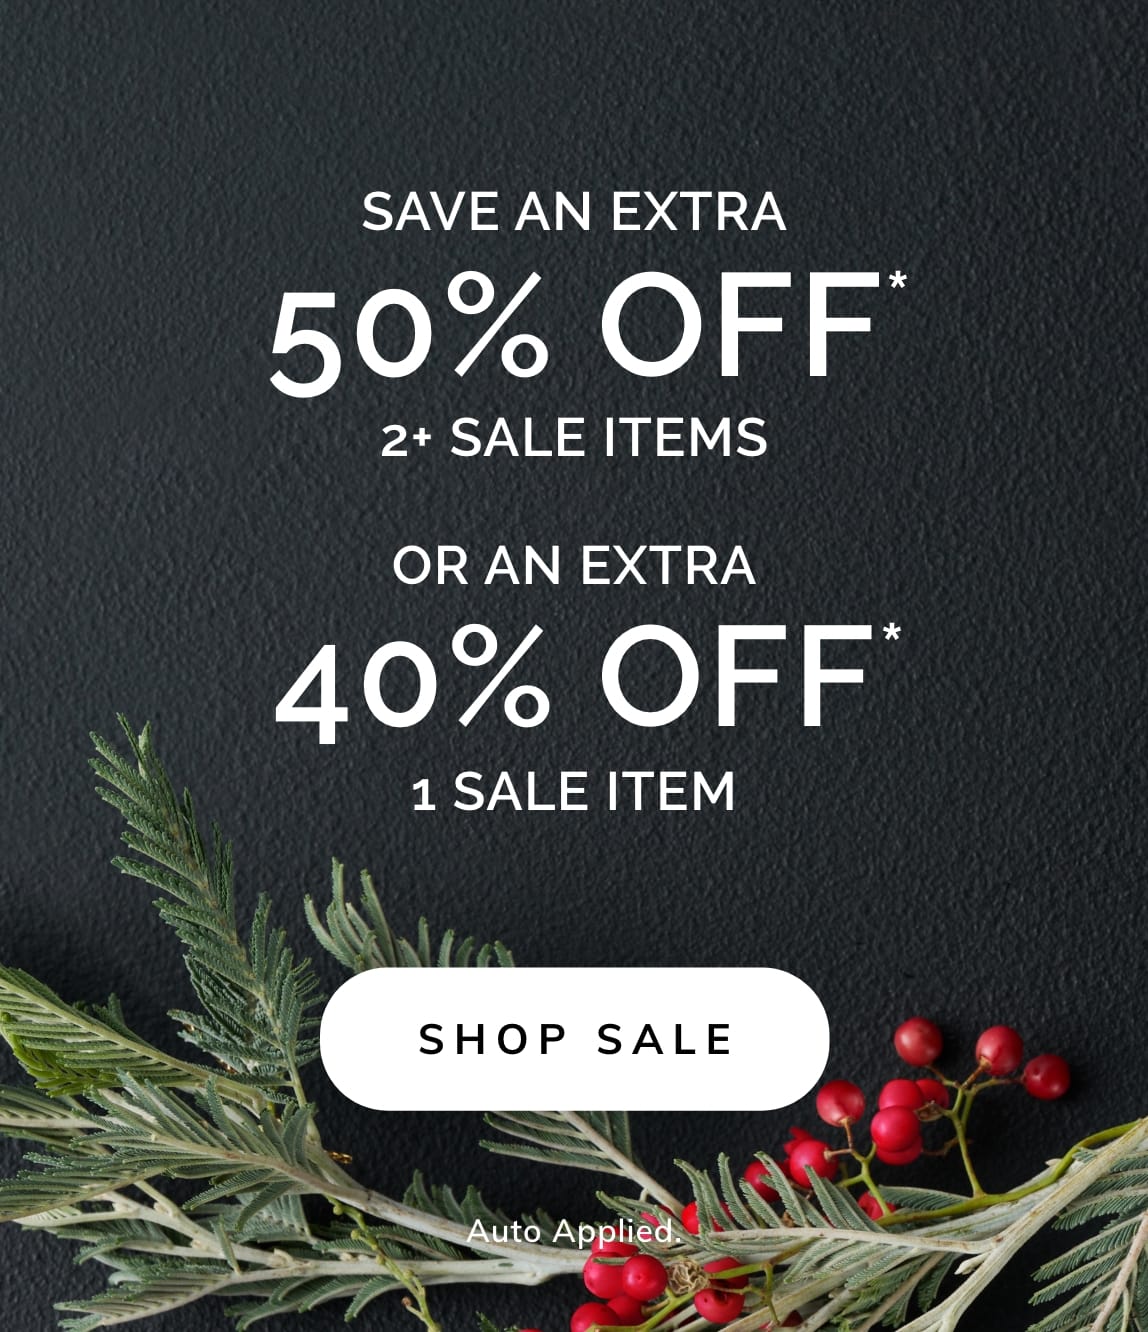 UP TO AN EXTRA 50% OFF SALE ITEMS